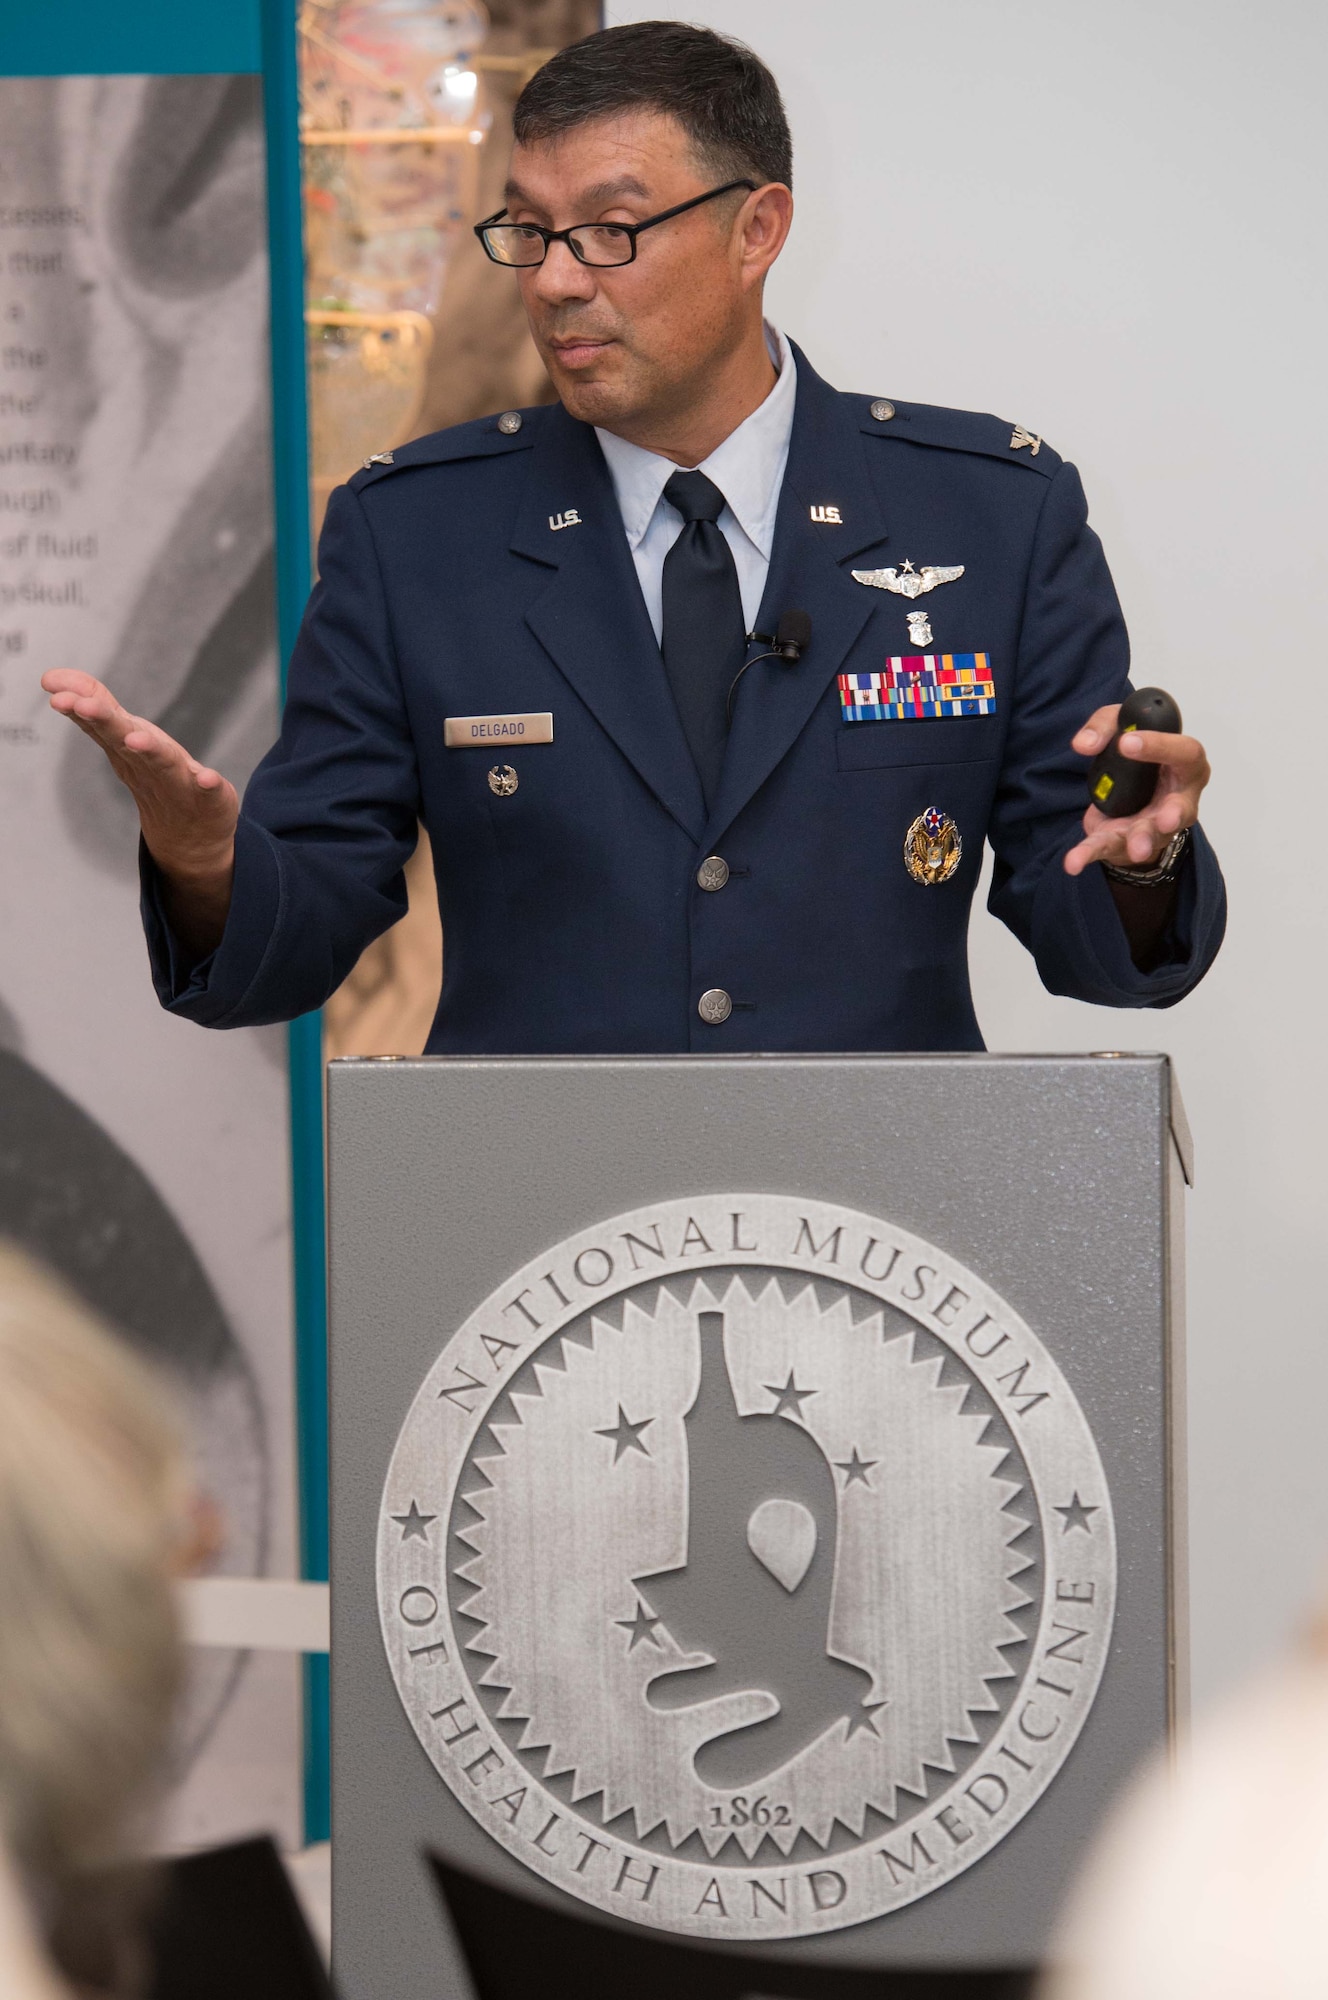 September 2016 Science Cafe.                             
U.S. Air Force Col. Antonio Jose Delgado, Medical Corps, the interim director of the International Health Specialist Program at the Air Force Medical Support Agency, spoke about global health engagement during the September Medical Museum Science Café, at the National Museum of Health and Medicine on Tuesday, Sept. 27, 2016. (Disclosure: This image has been cropped to emphasize the subject.) (National Museum of Health and Medicine photo by Matthew Breitbart/ Released)